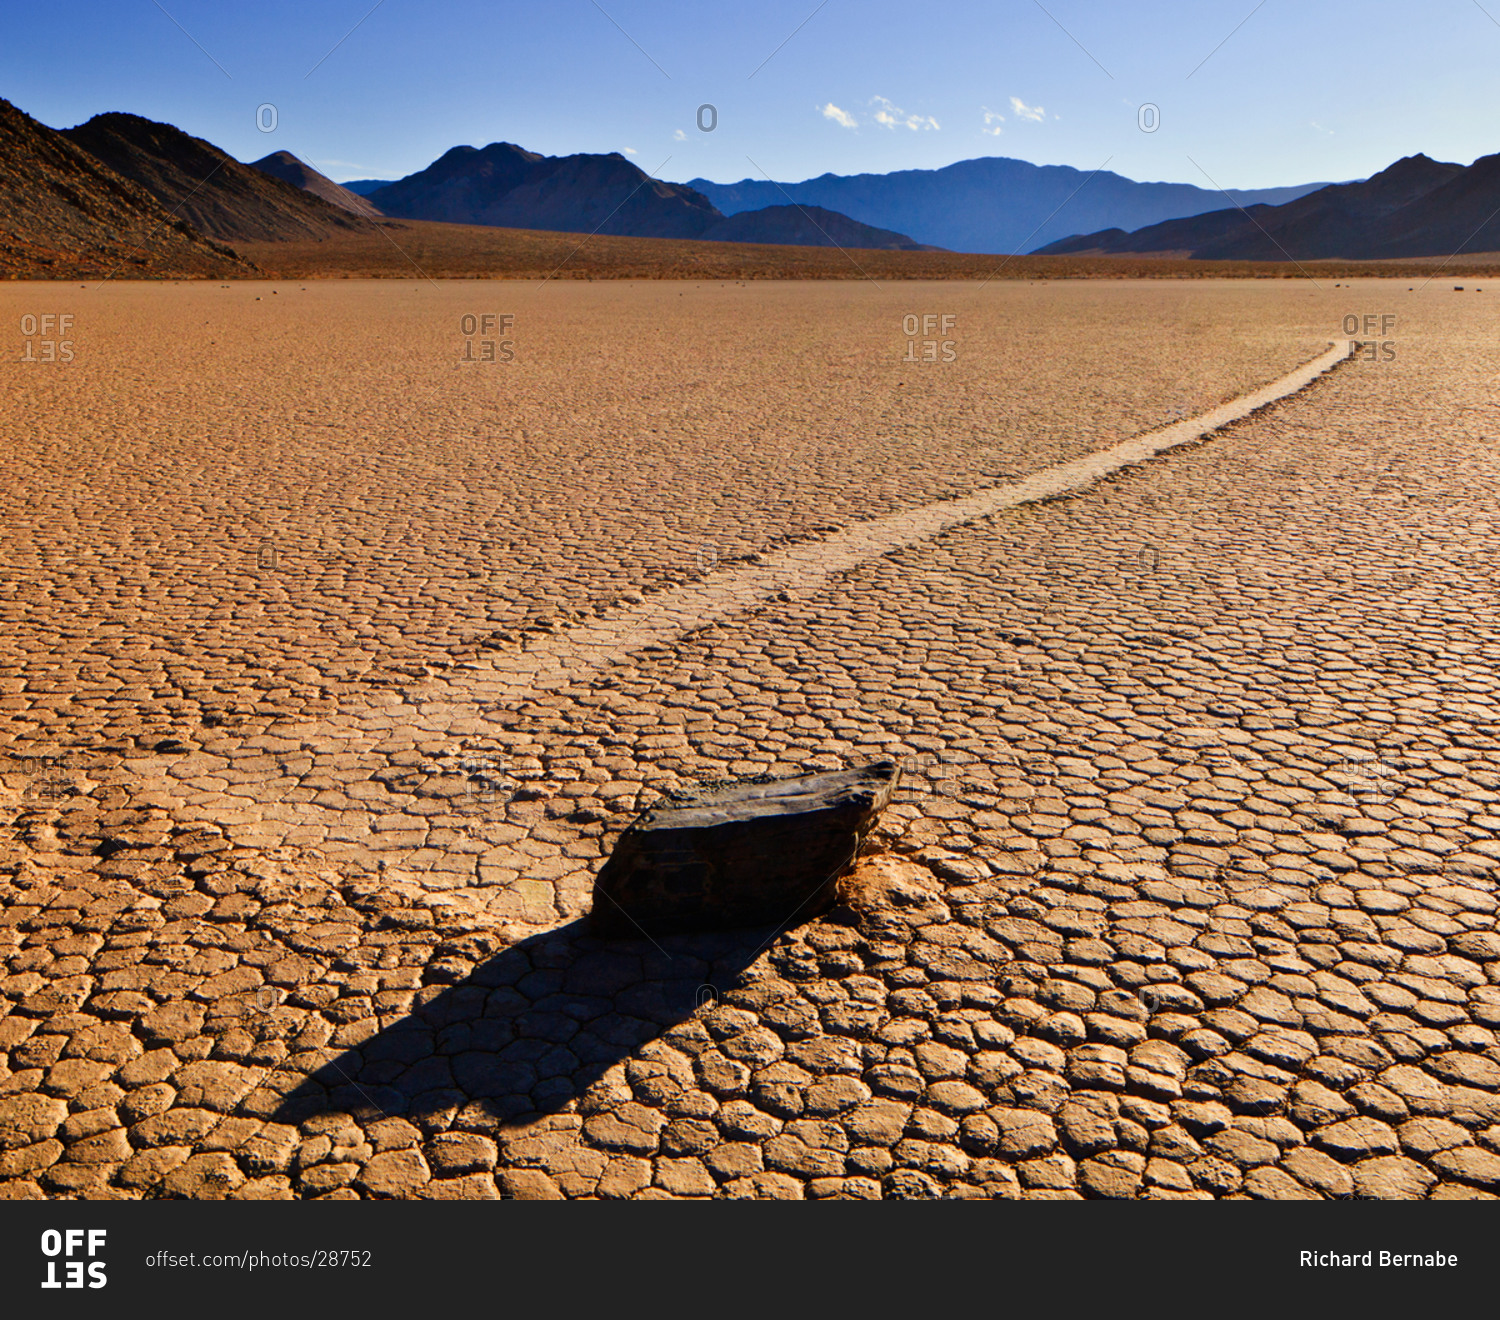 Sailing Stone, The Racetrack Playa, Death Valley National Park, California